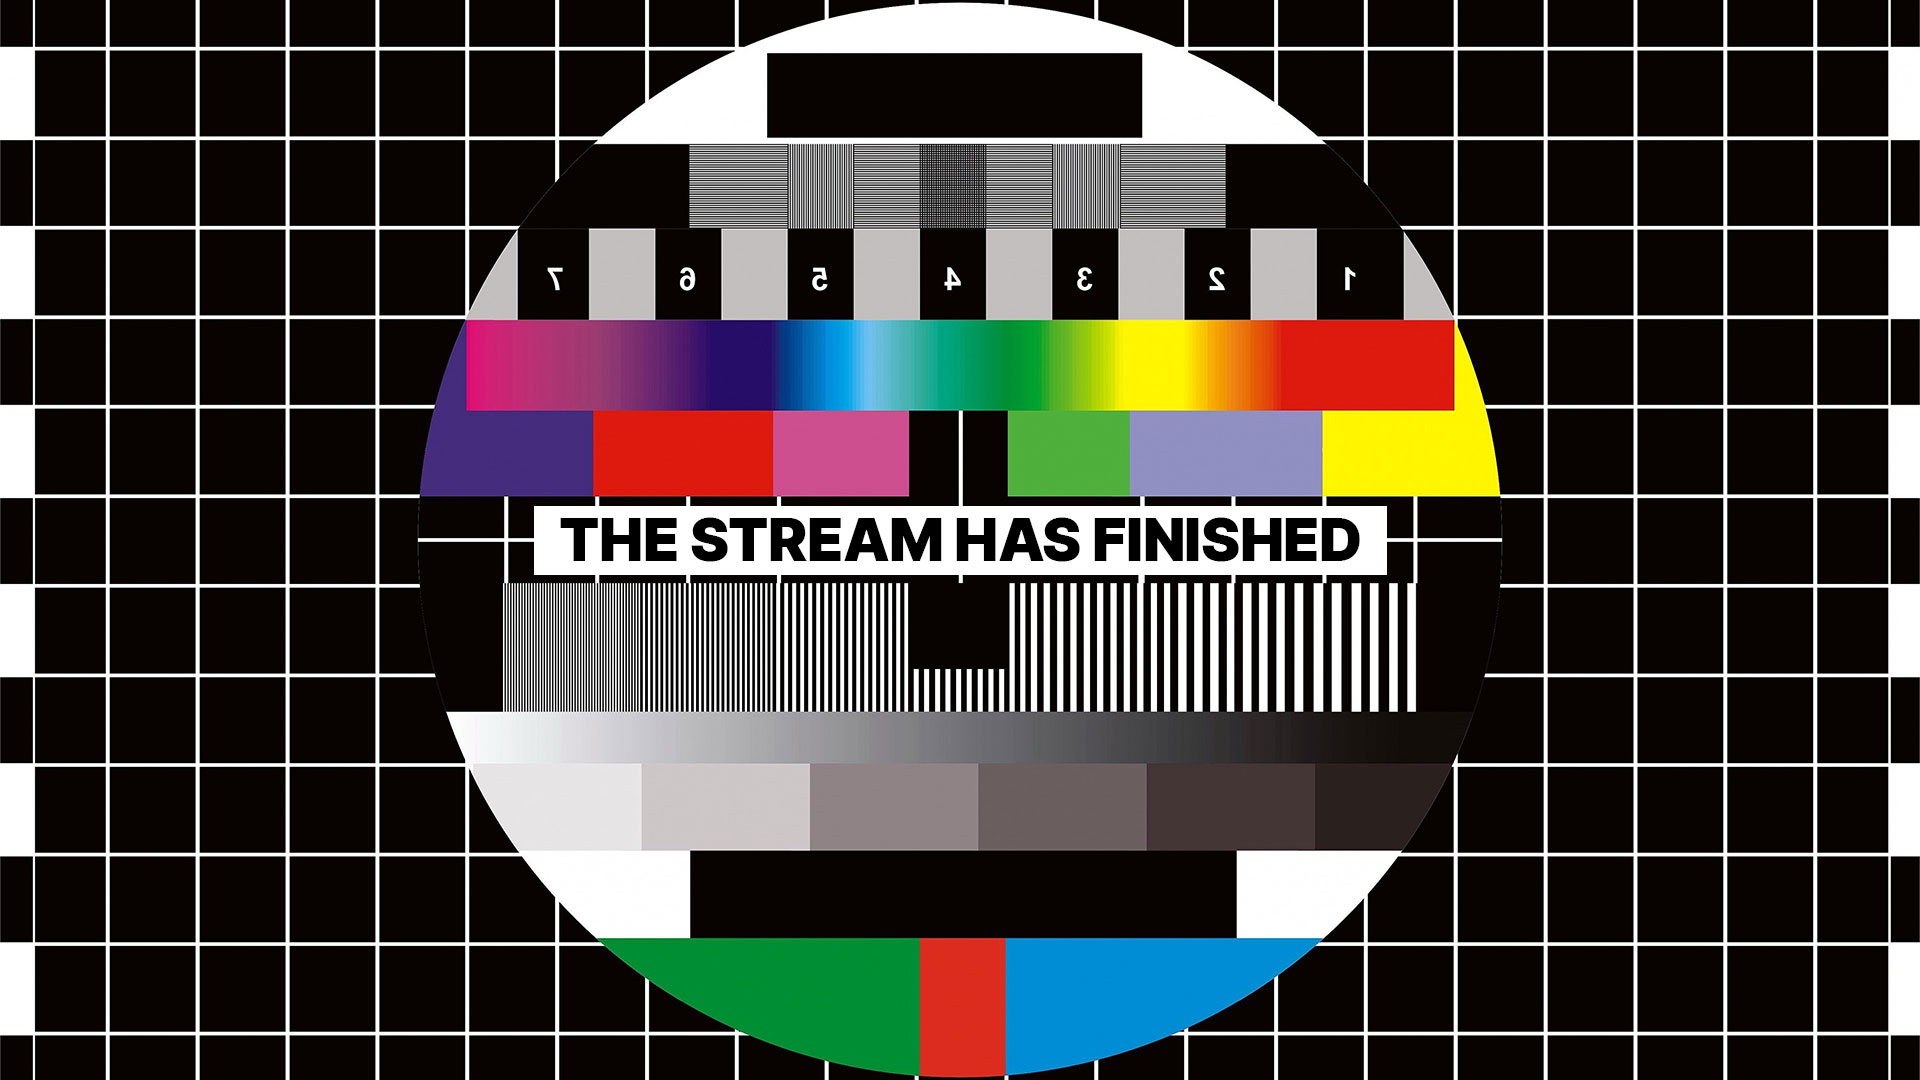 The stream has finished